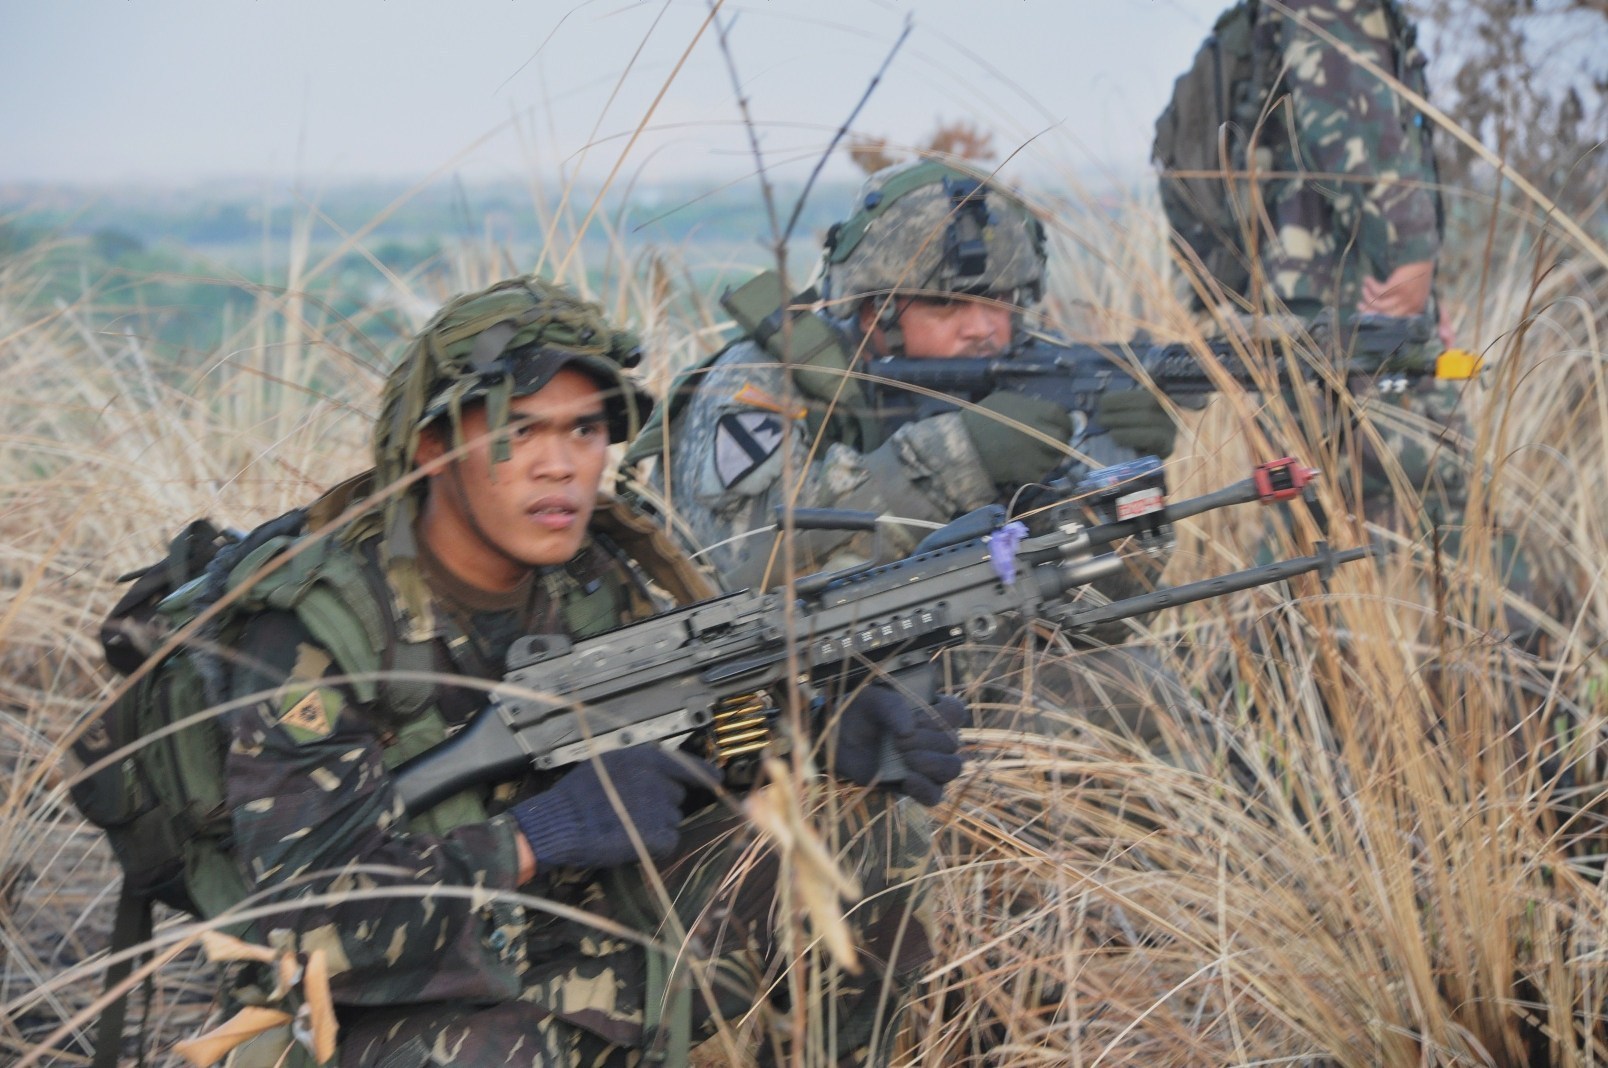 Philippine, US soldiers conduct raid during Exercise Balikatan 2012 [Image 3 of 5]